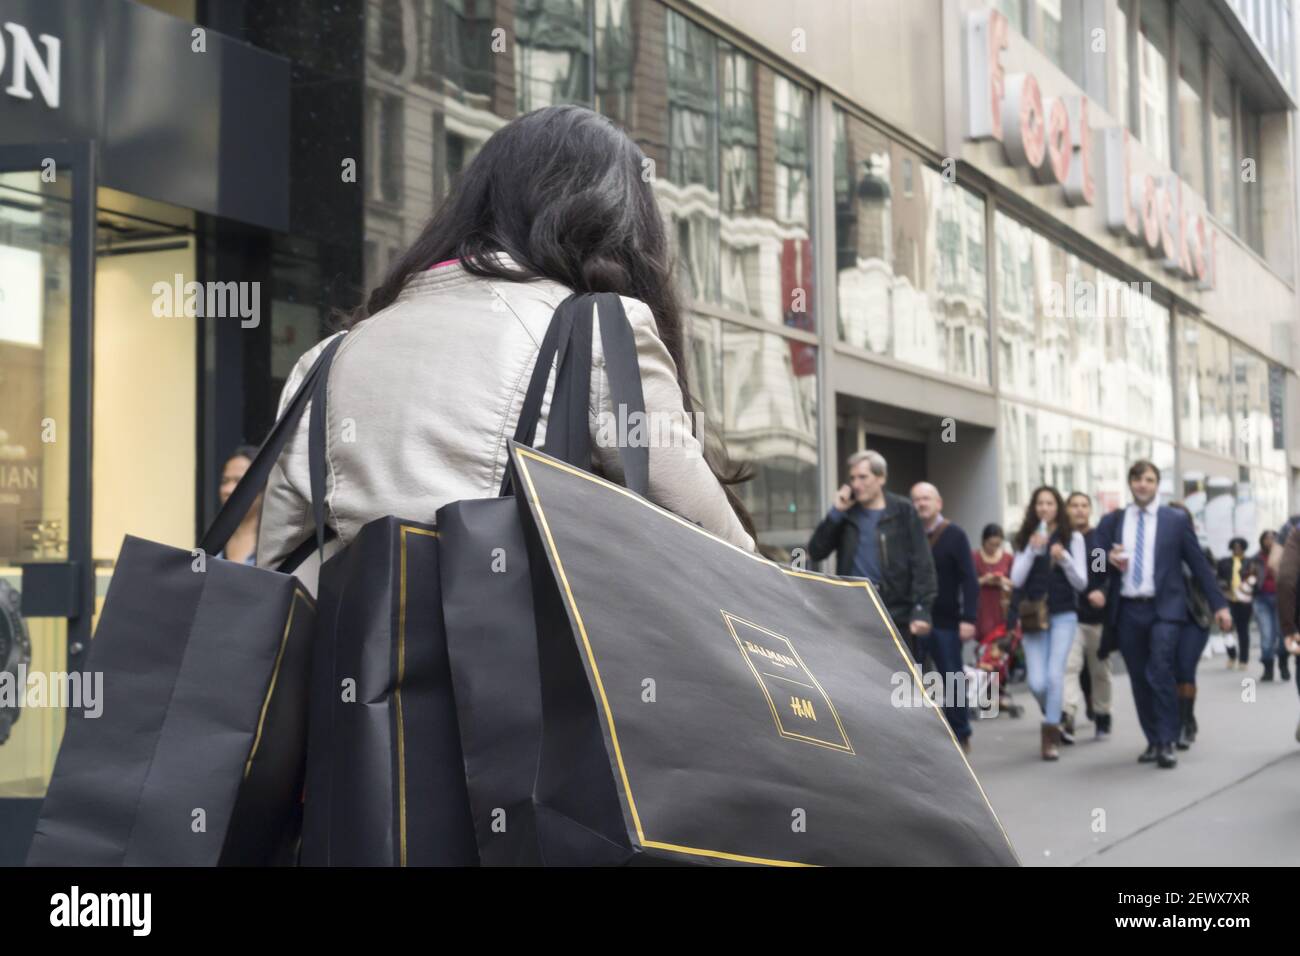 Shoppers leave an H&M store in New York with their Balmain x H&M purchases  on Thursday, November 5, 2015. Qatar's Mayhoola sovereign wealth fund has  purchased the Balmain fashion house for a